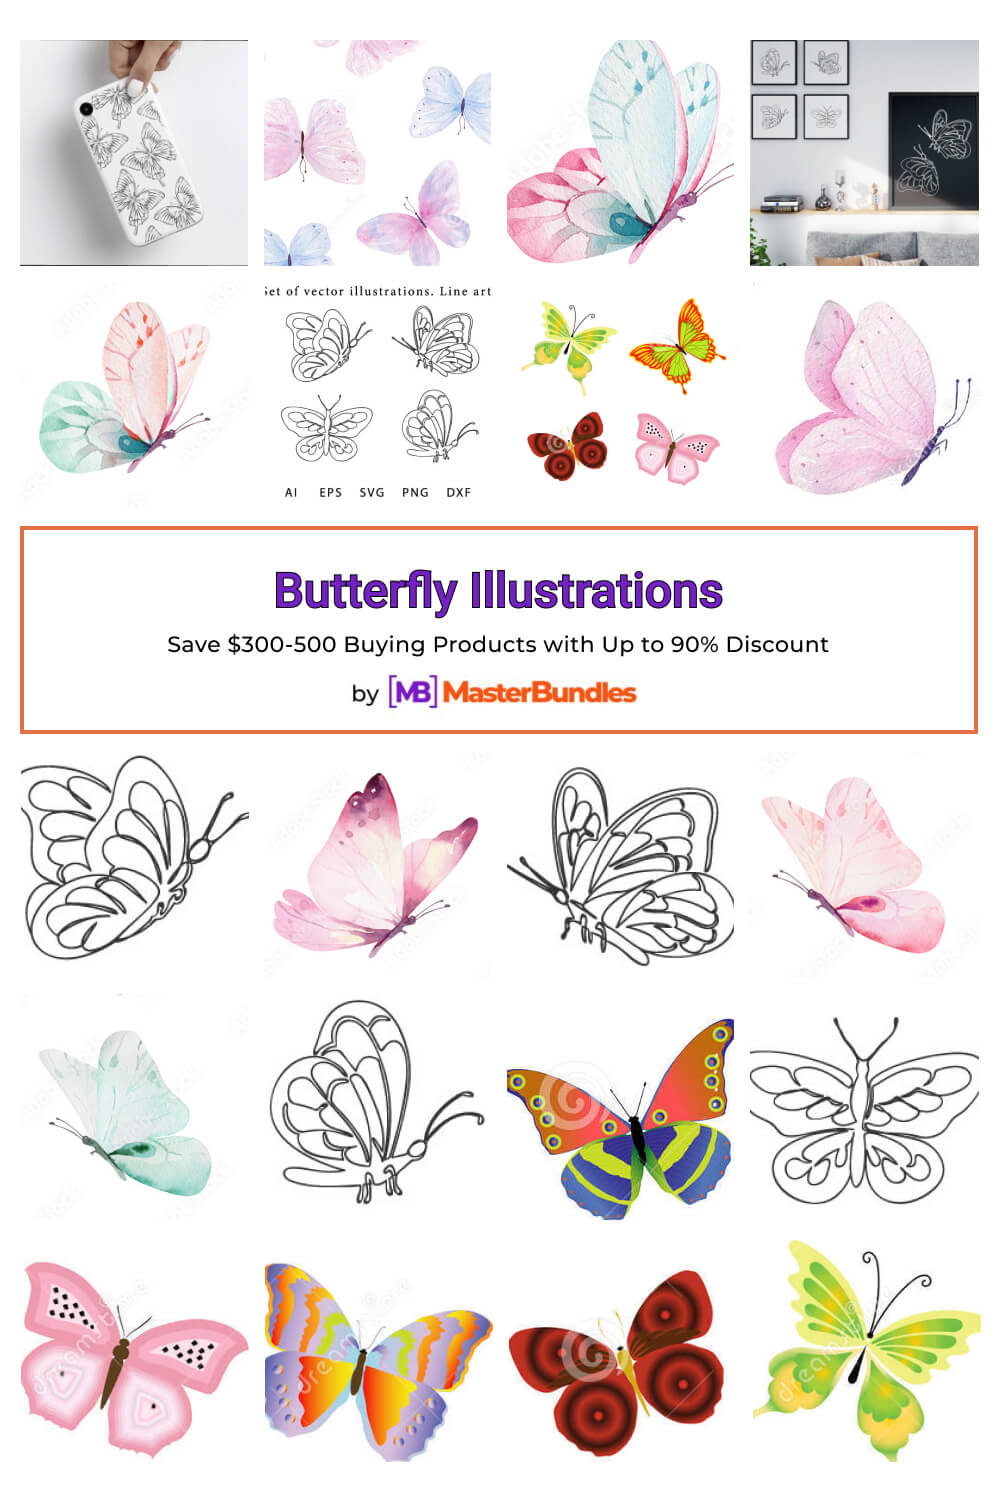 butterfly illustrations pinterest image.